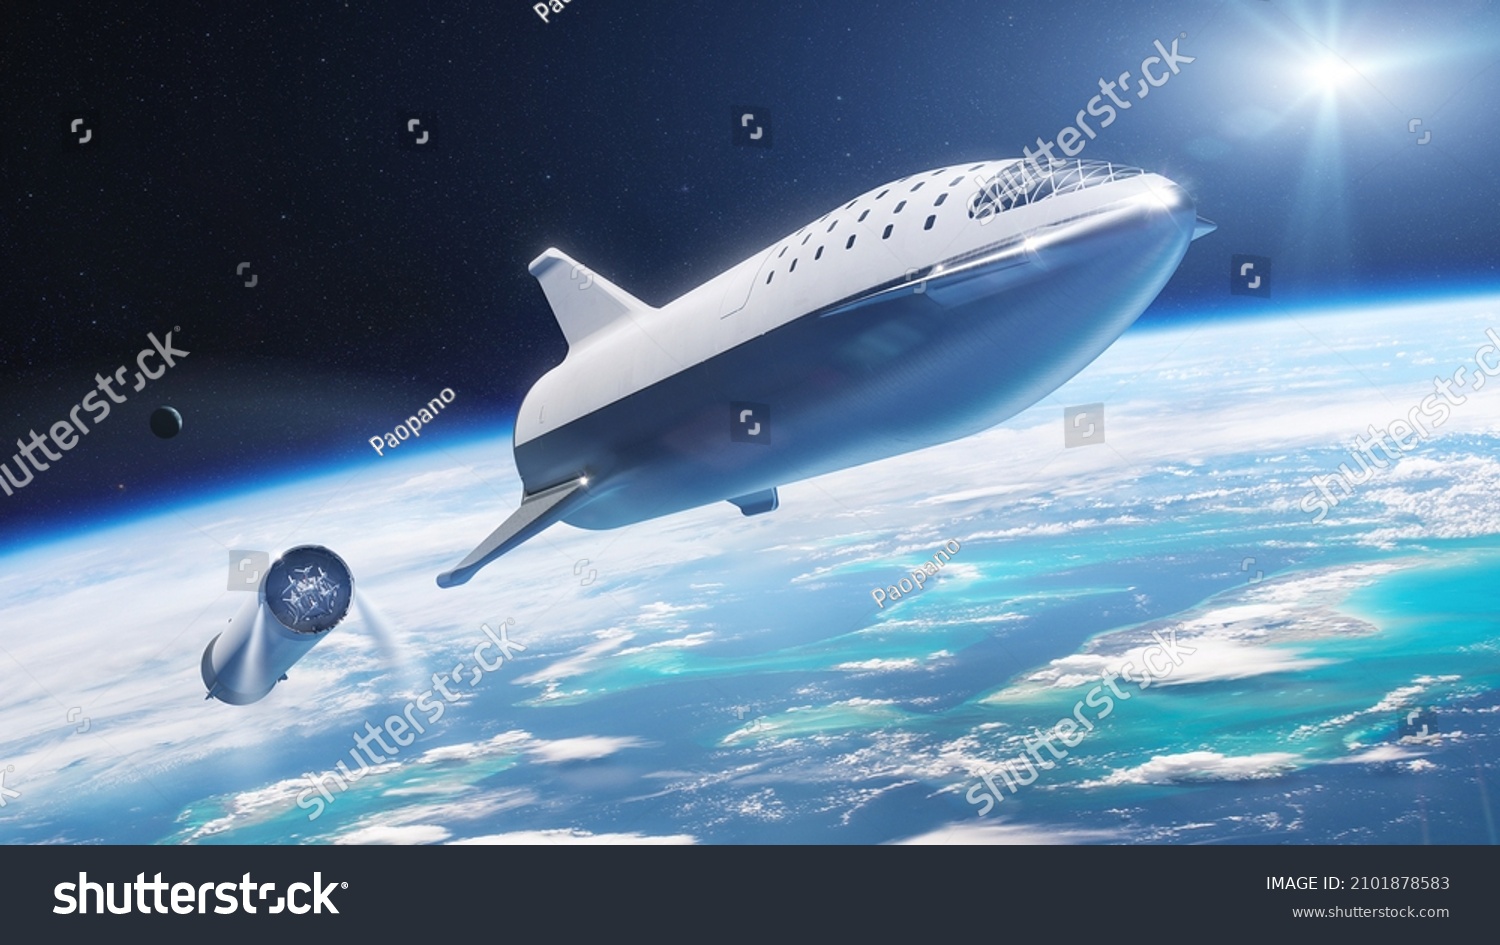 Star ship in low-Earth orbit. Elements of this image furnished by NASA. #2101878583